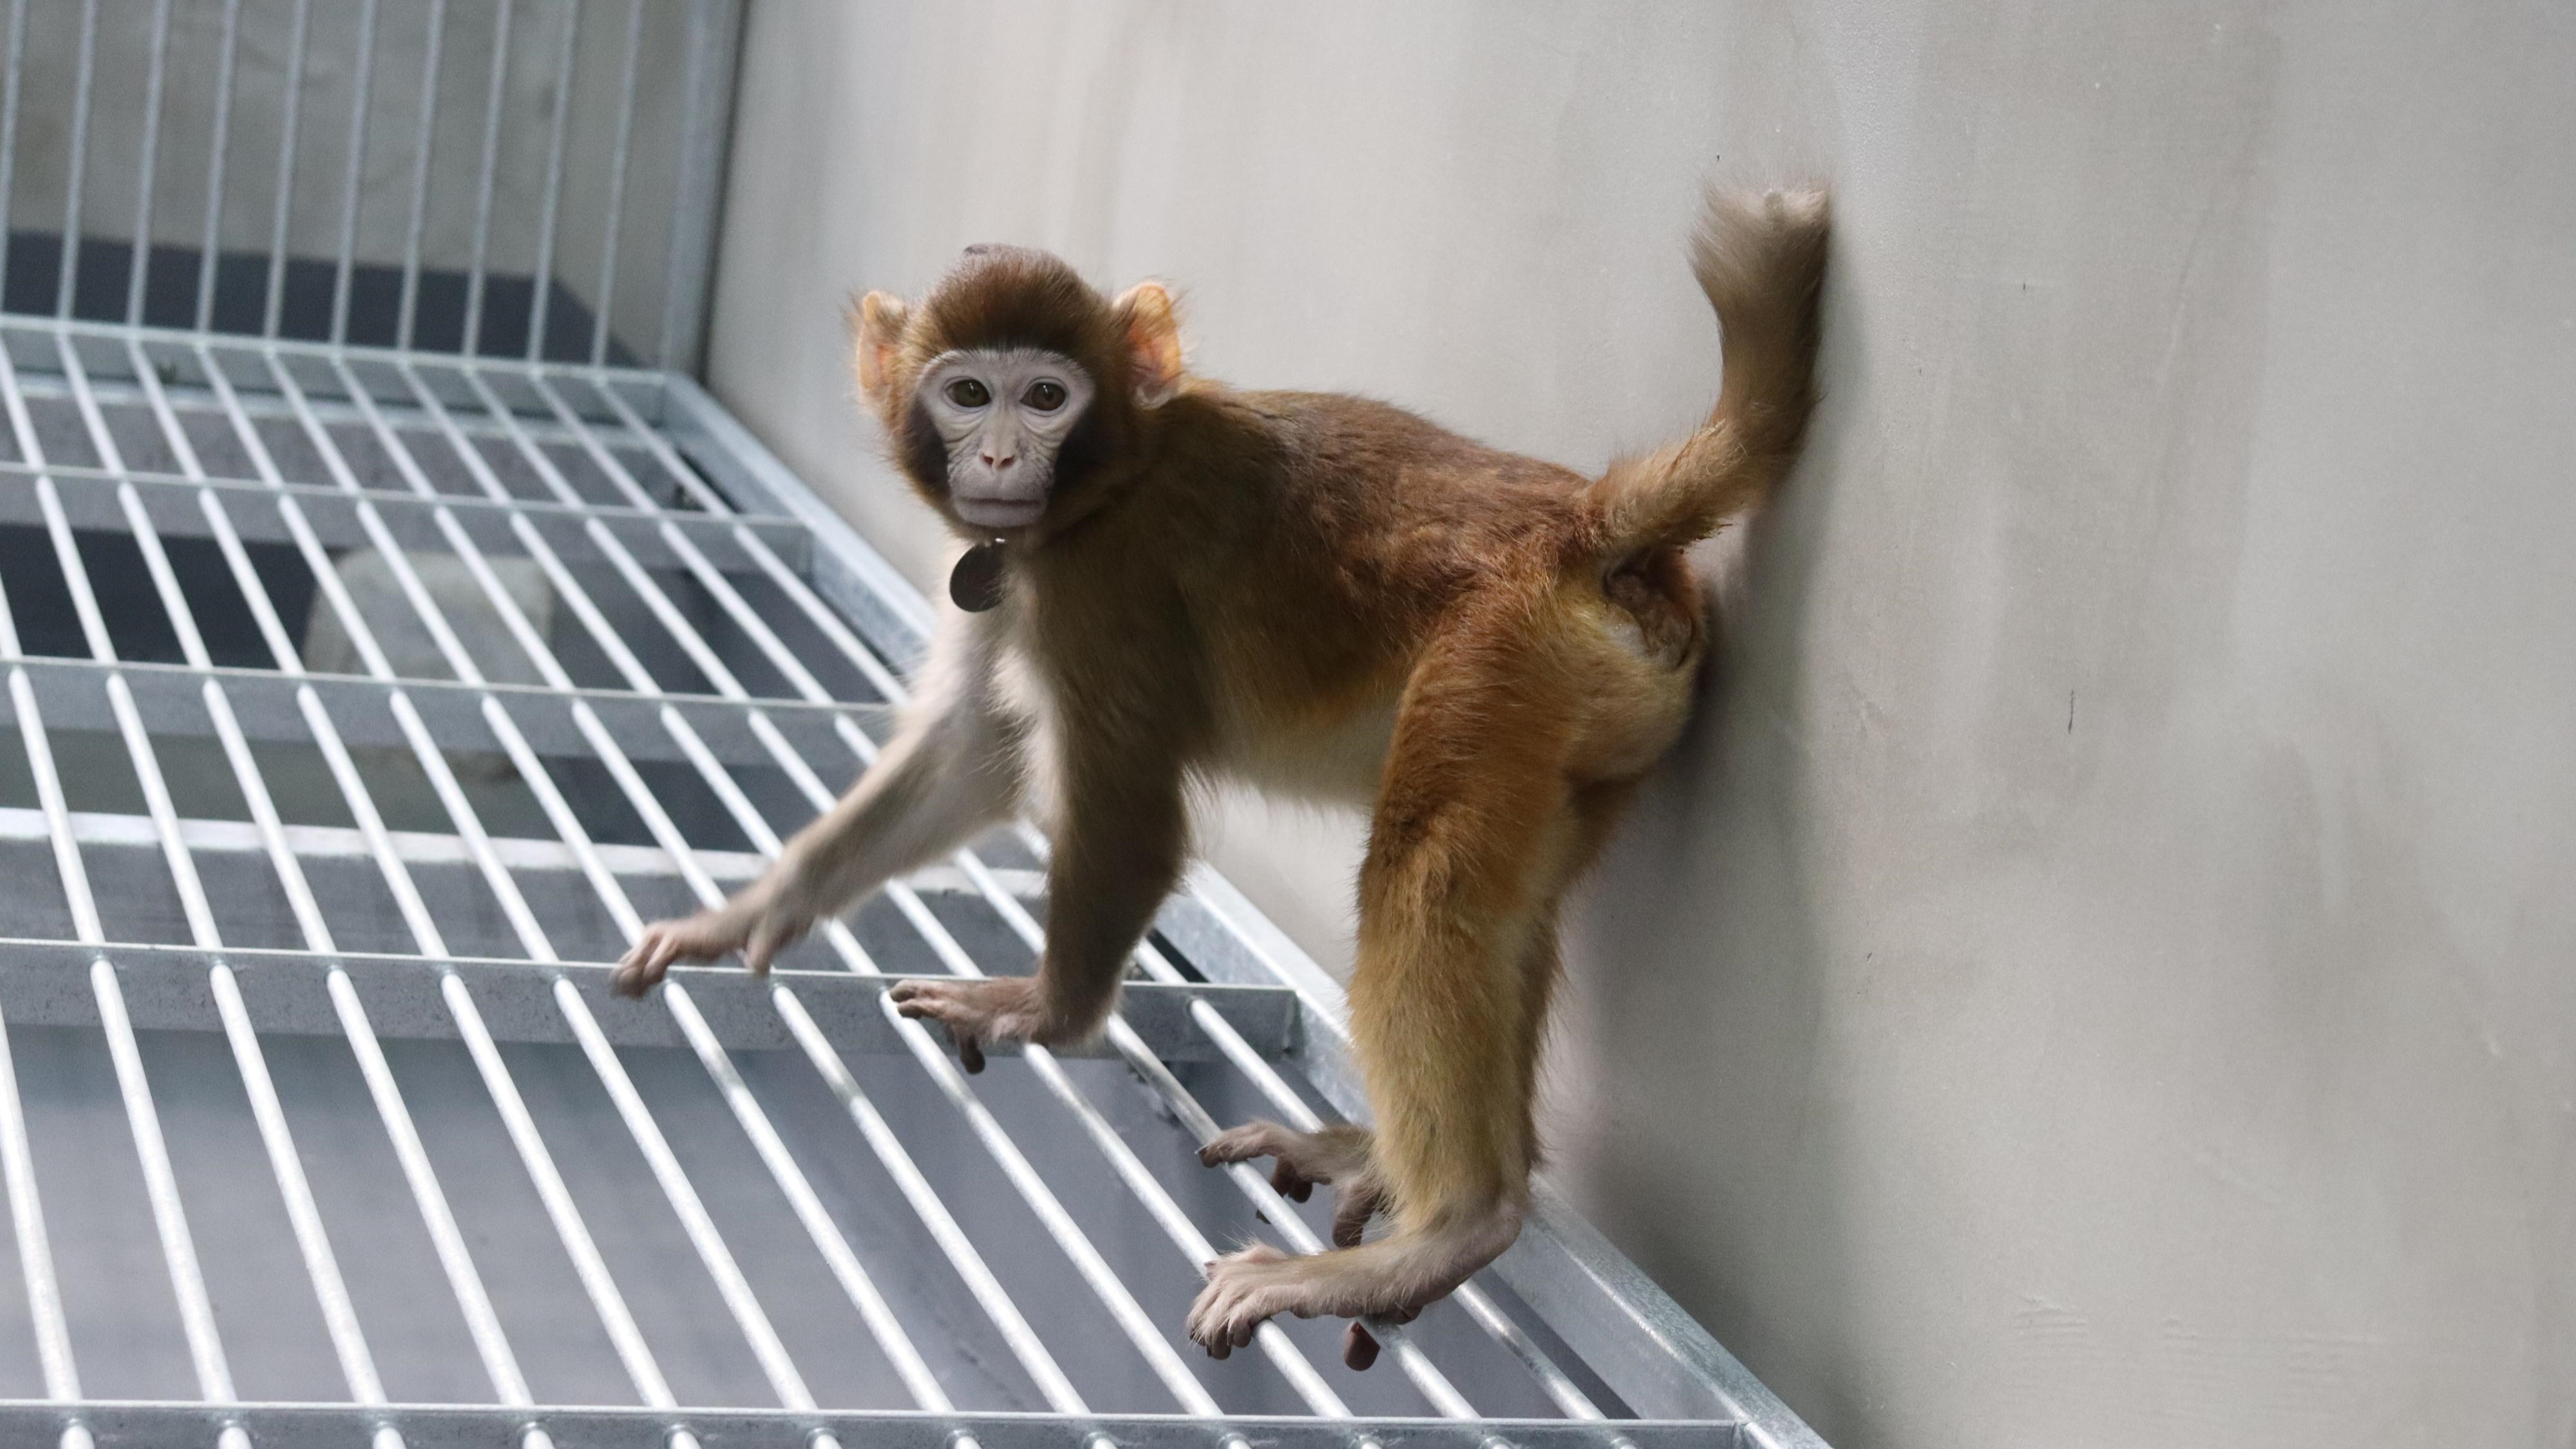 The cloned rhesus monkey stands on a metal grate.